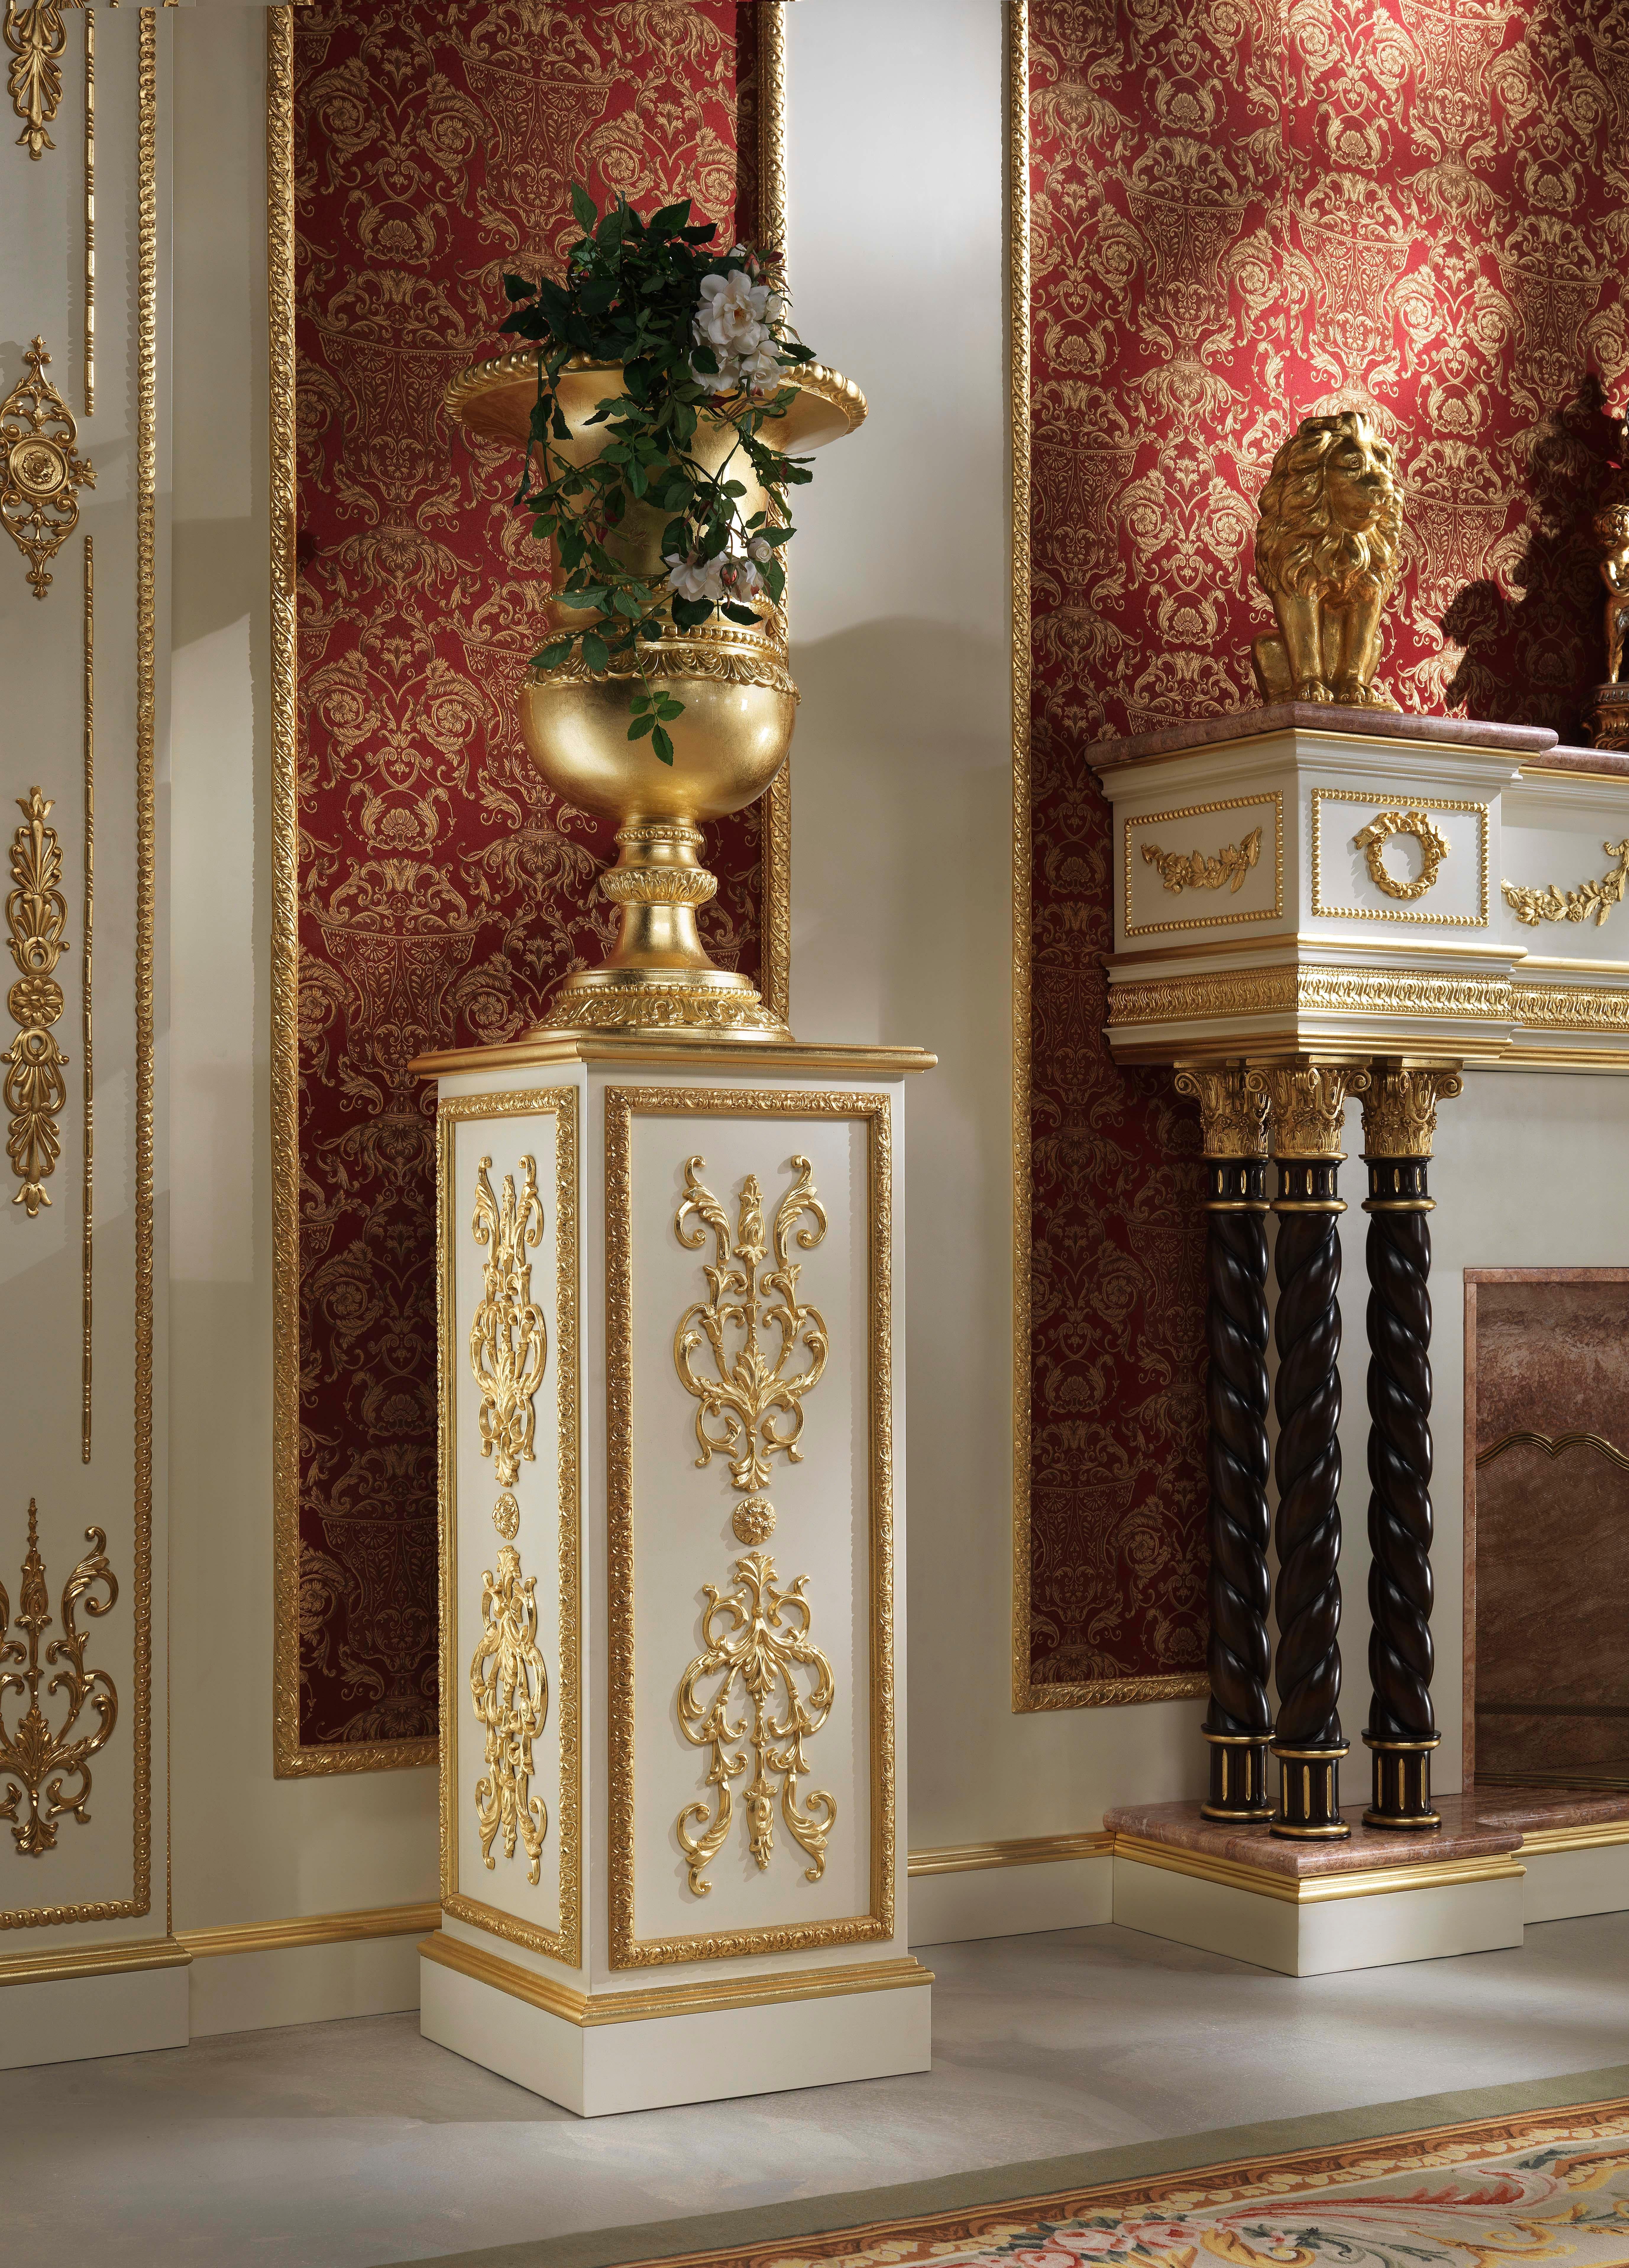 Furnish your high-end penthouse with some classical Made in Italy decoration. Modenese Interiors is happy to introduce you this wonderfully carved classic wooden vase completely hand decorated with gold leaf finish. Classical luxury inspiration can